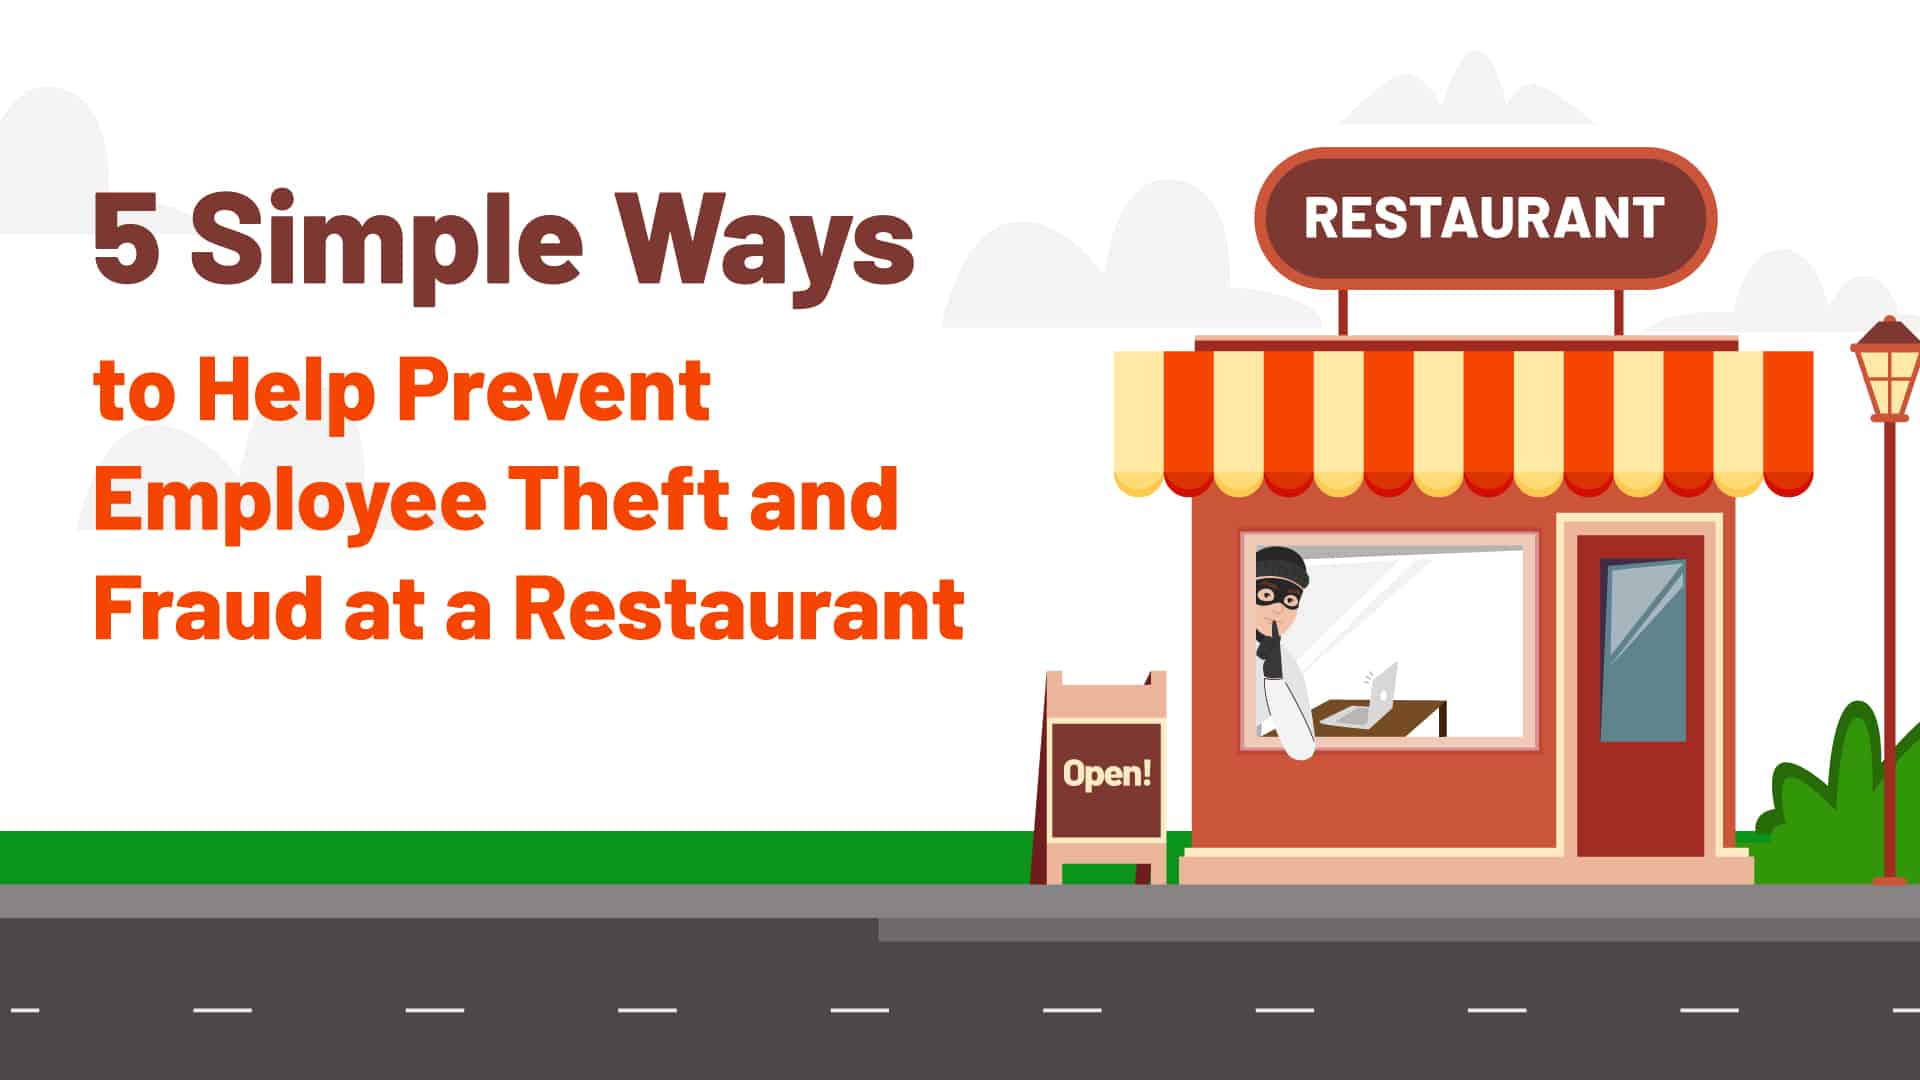 5 Simple Ways to Help Prevent Employee Theft and Fraud at a Restaurant